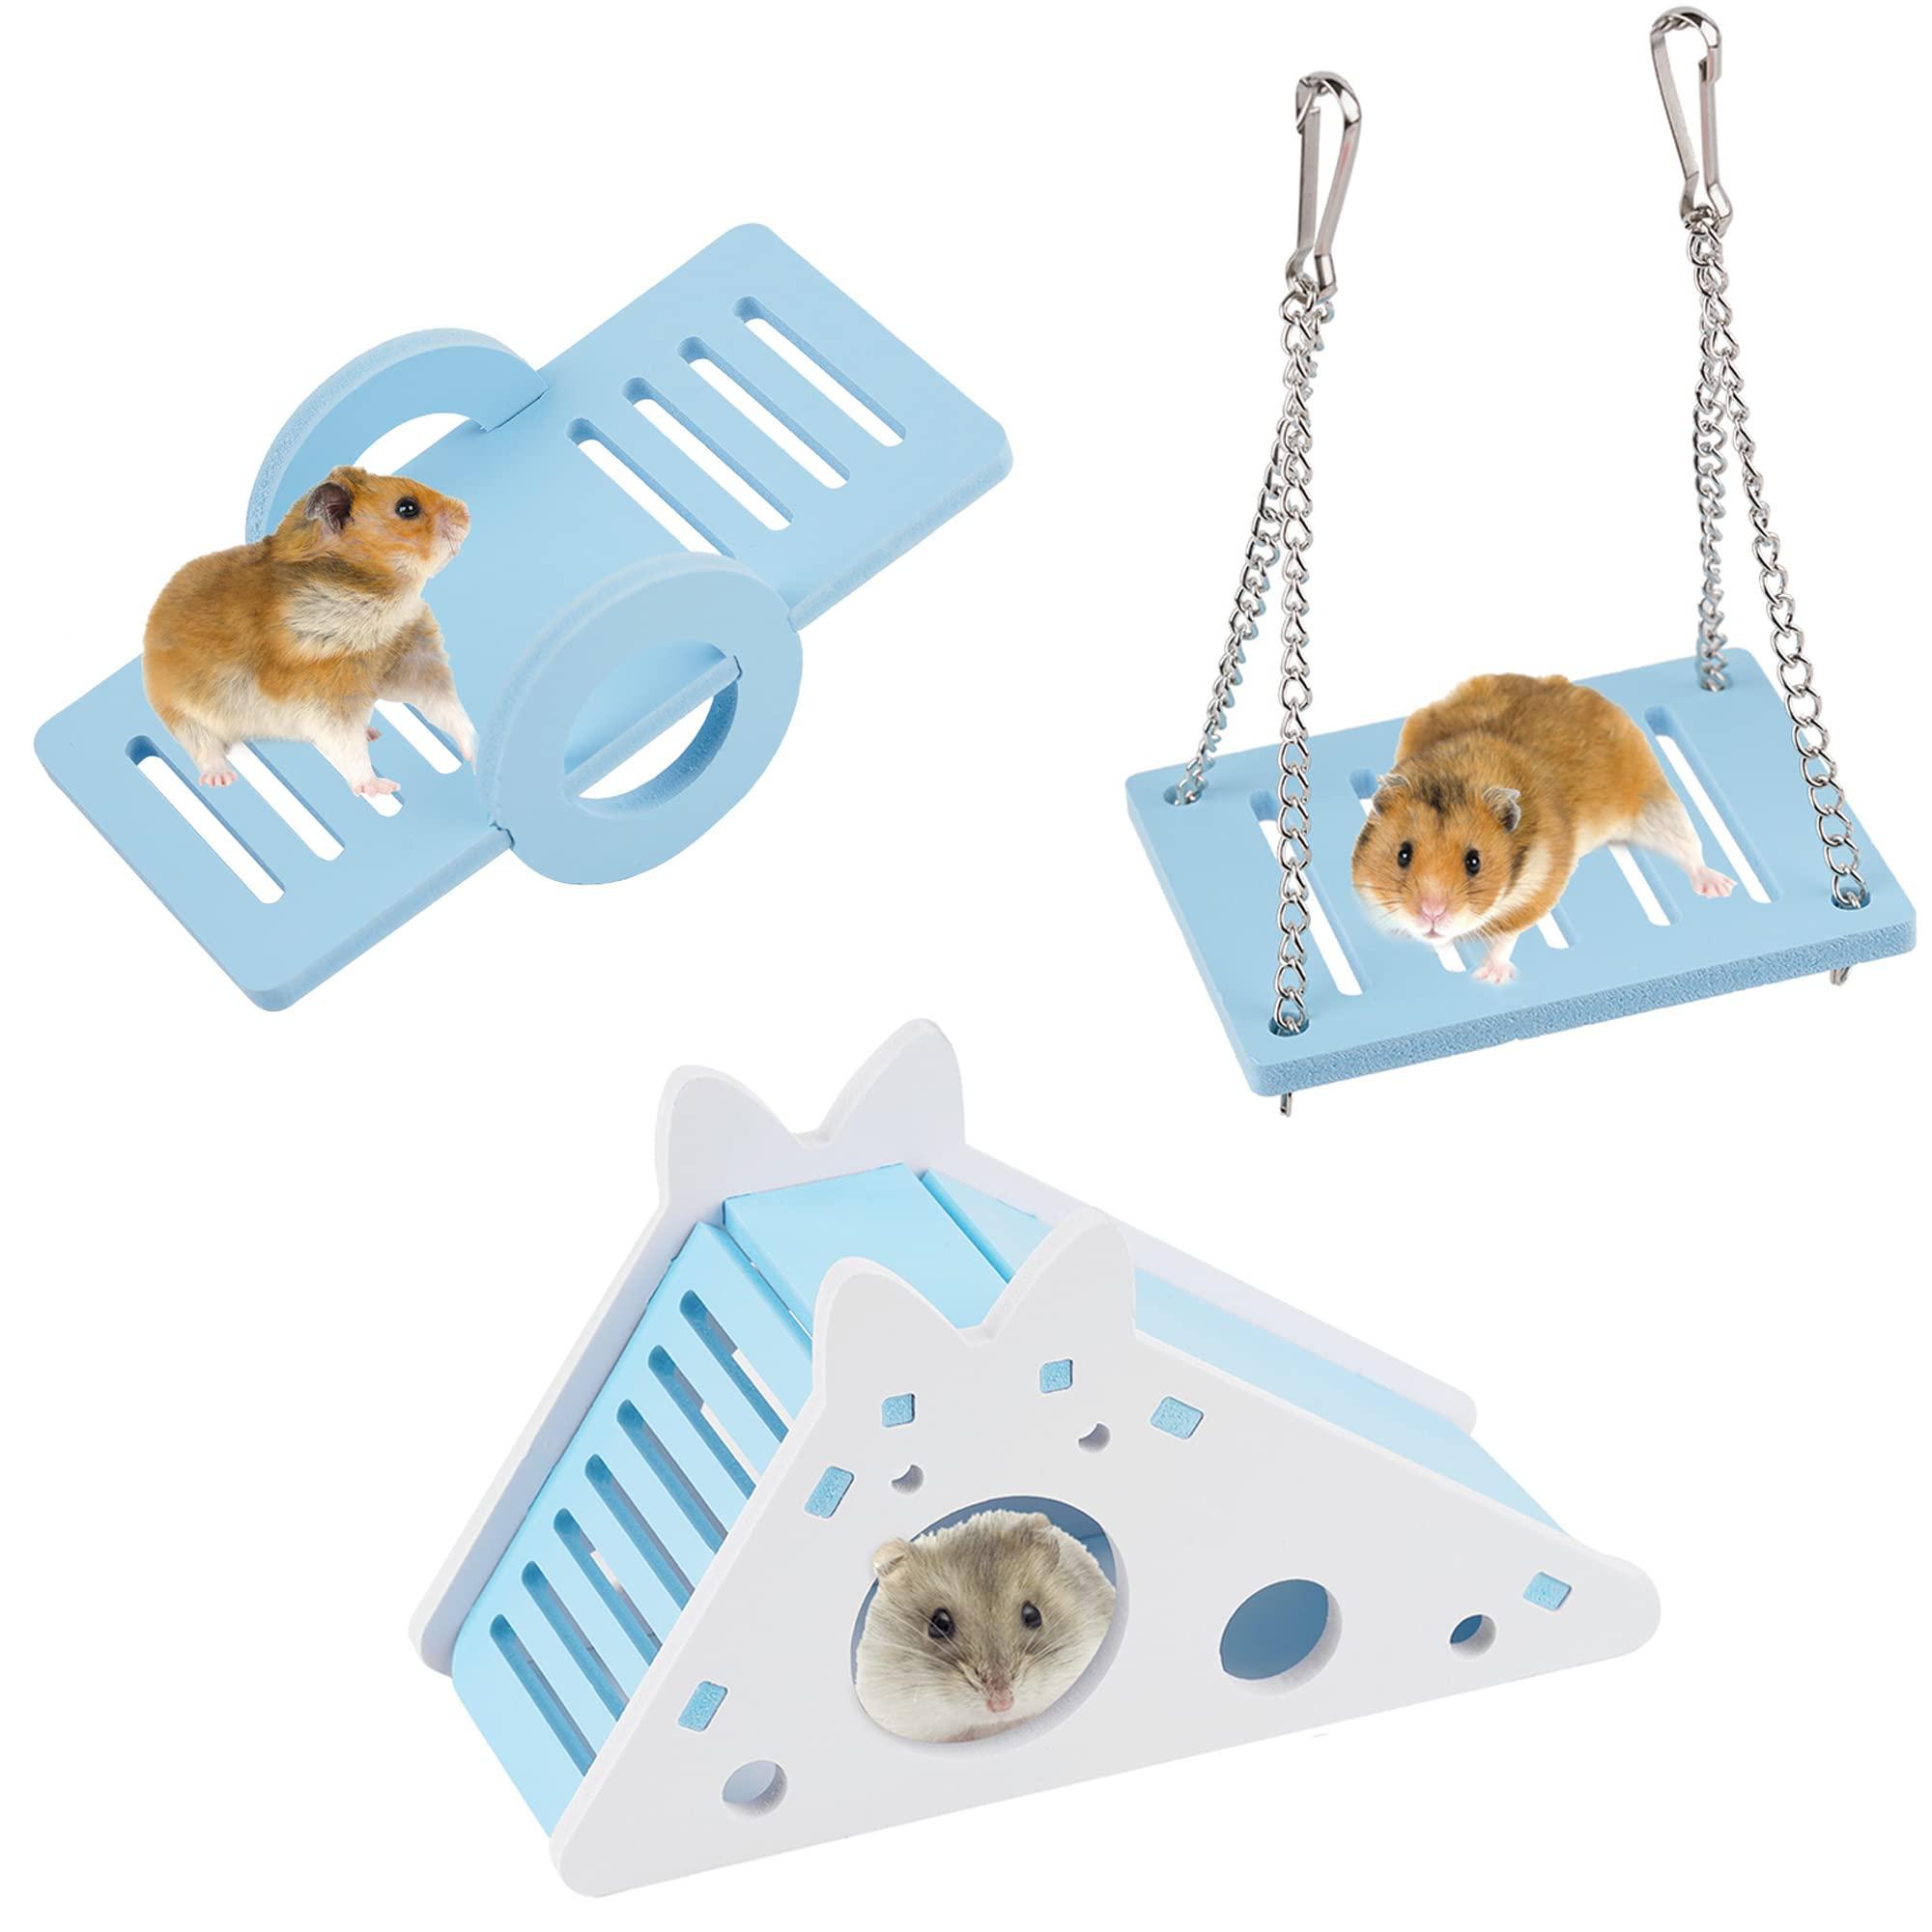 Kuaman 3 PCS Hamster Play Toys, Ecological Board Hamster House, Hamster Seesaw and Swing for Small Animals, Hamster DIY Cage Accessories for Climbing and Playing